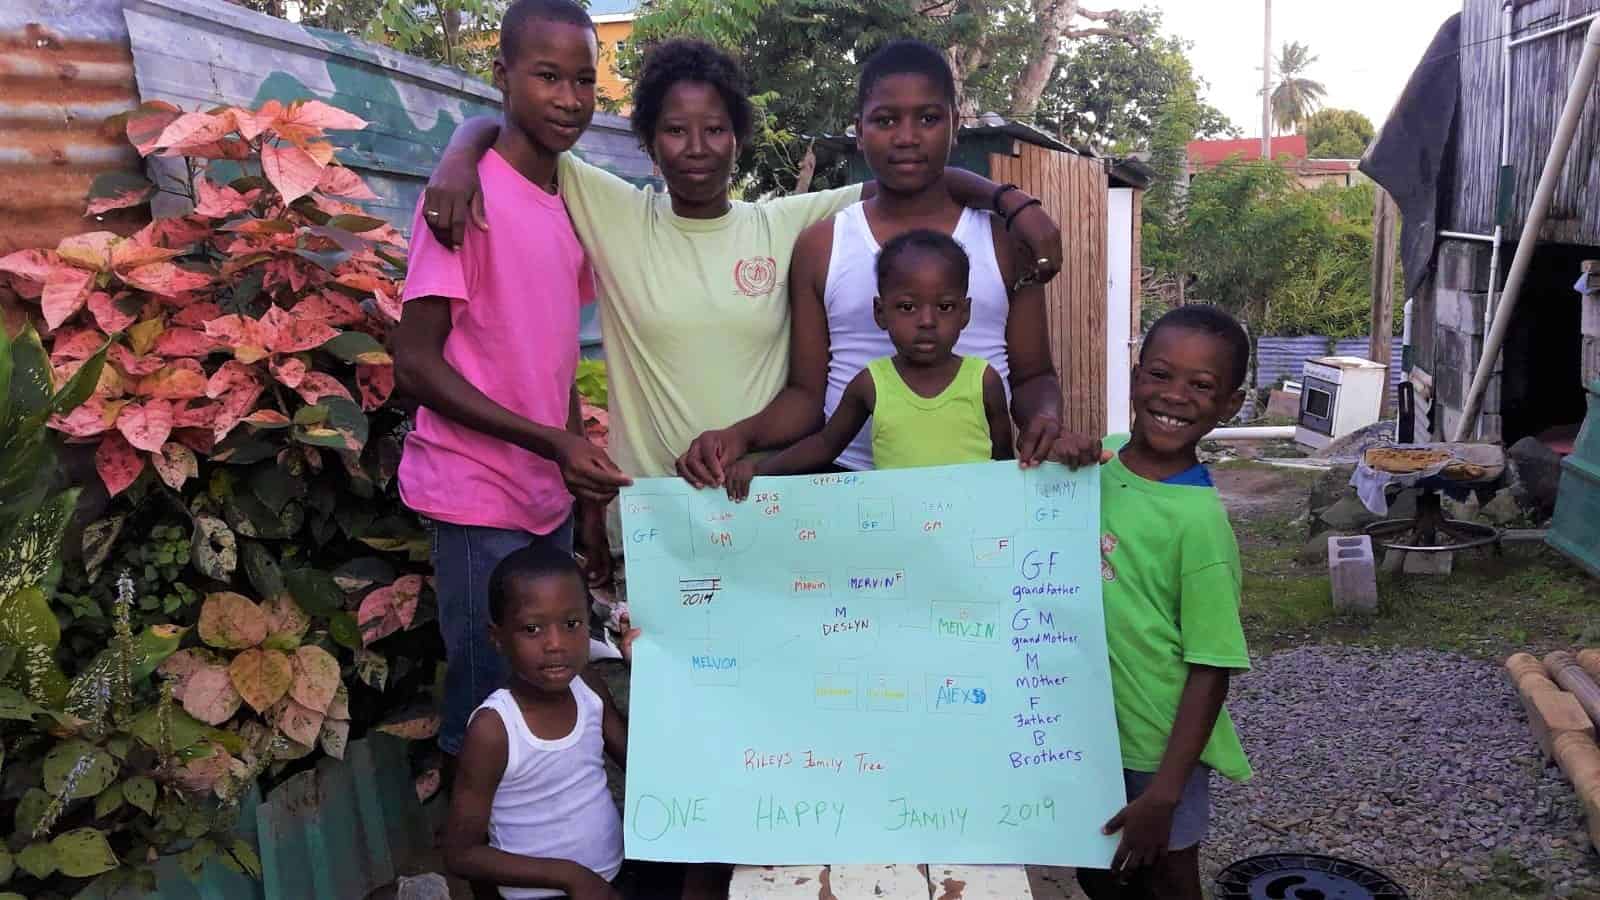 Participating-Family-in-St.-Kitts-and-Nevis-With-Their-Genogram-1 